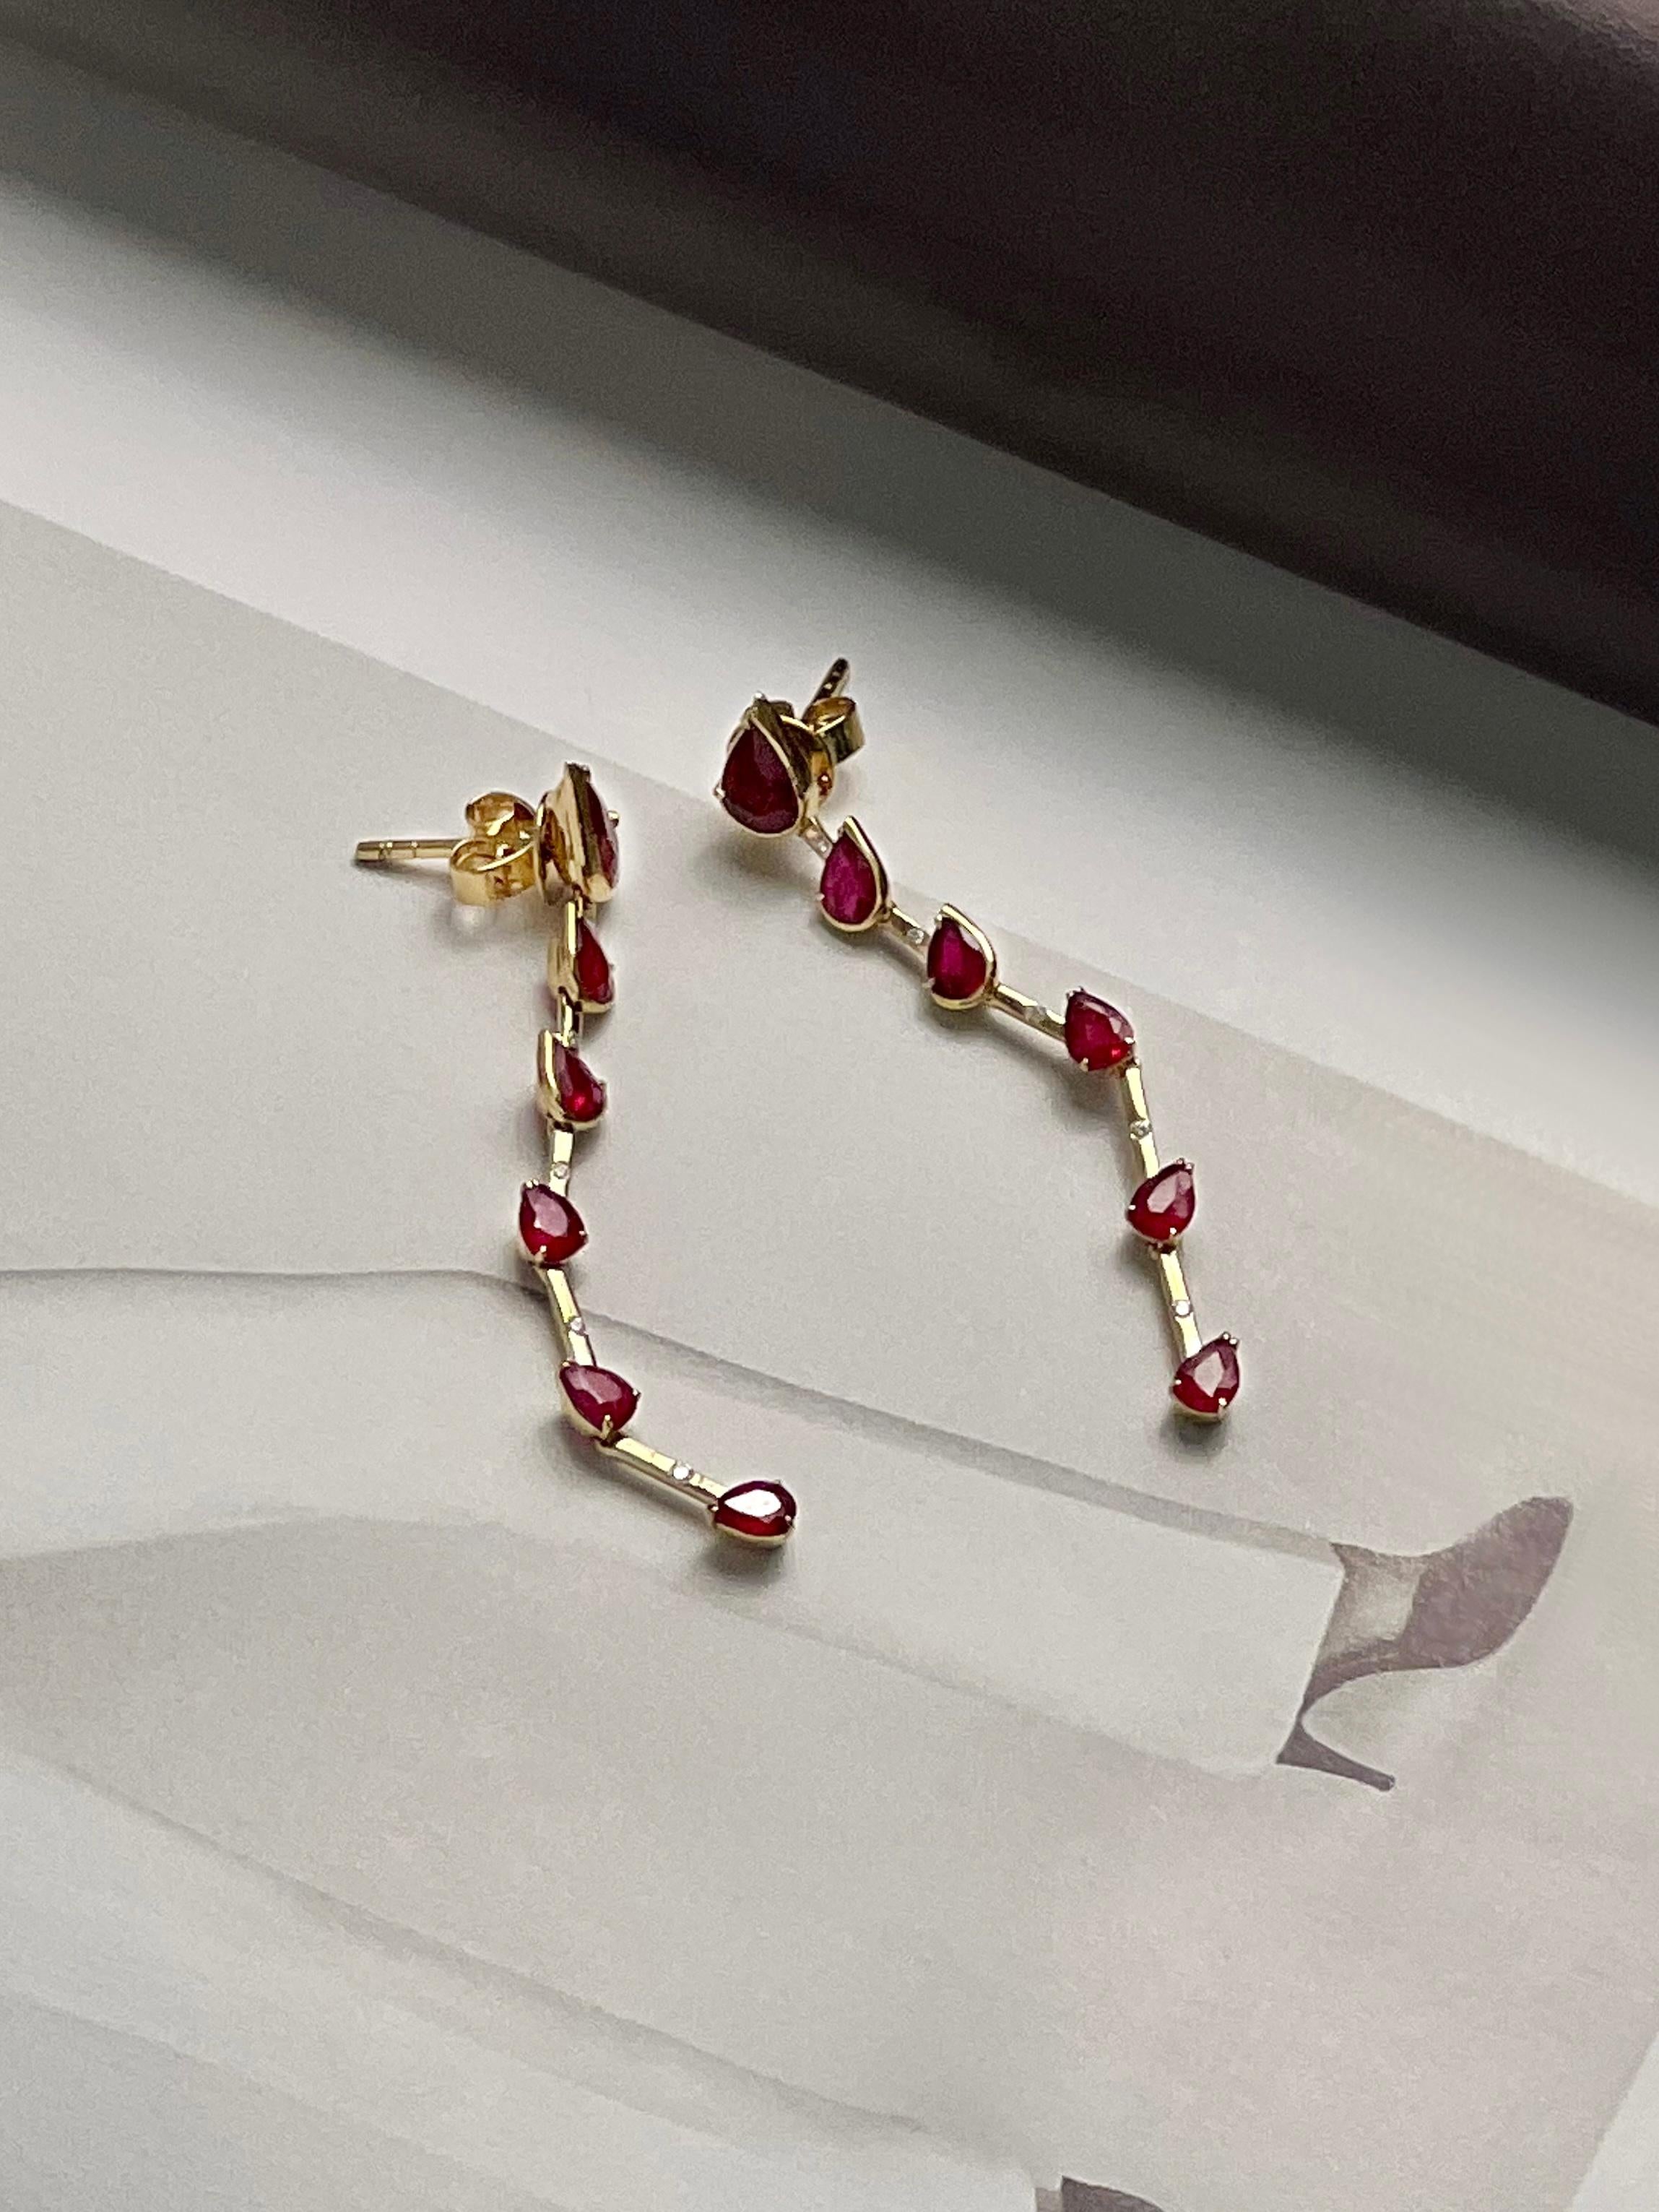 These stunning pear shaped ruby drop earrings are crafted in luxurious 18k yellow gold. The lustrous gold frames the vivid and eye-catching rubies, separated by small diamonds. The rubies are cut in a unique pear shape totalling 2.84cts. They add an